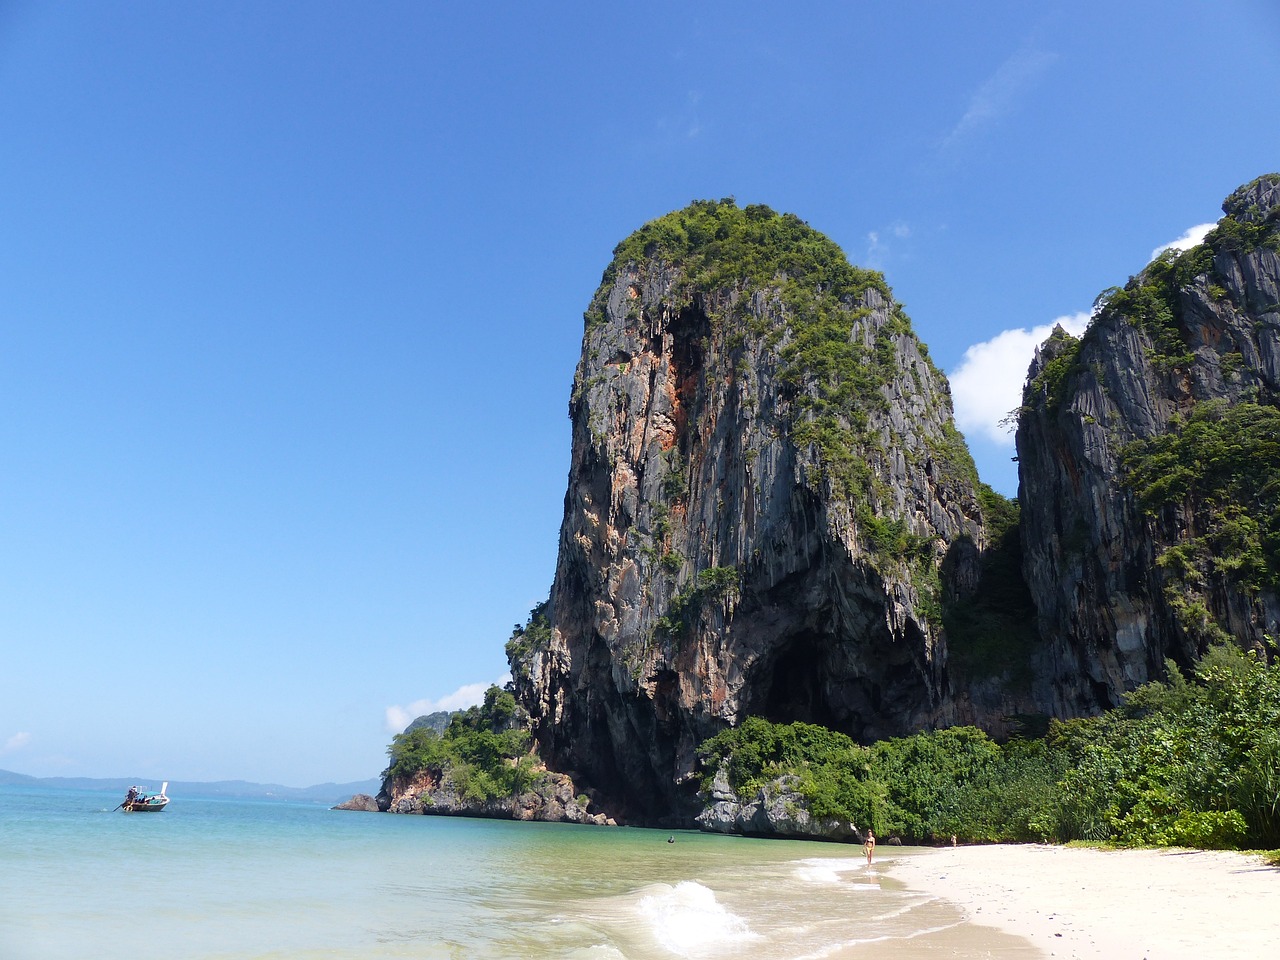 Krabi Island Paradise: 4 Days of Adventure and Relaxation